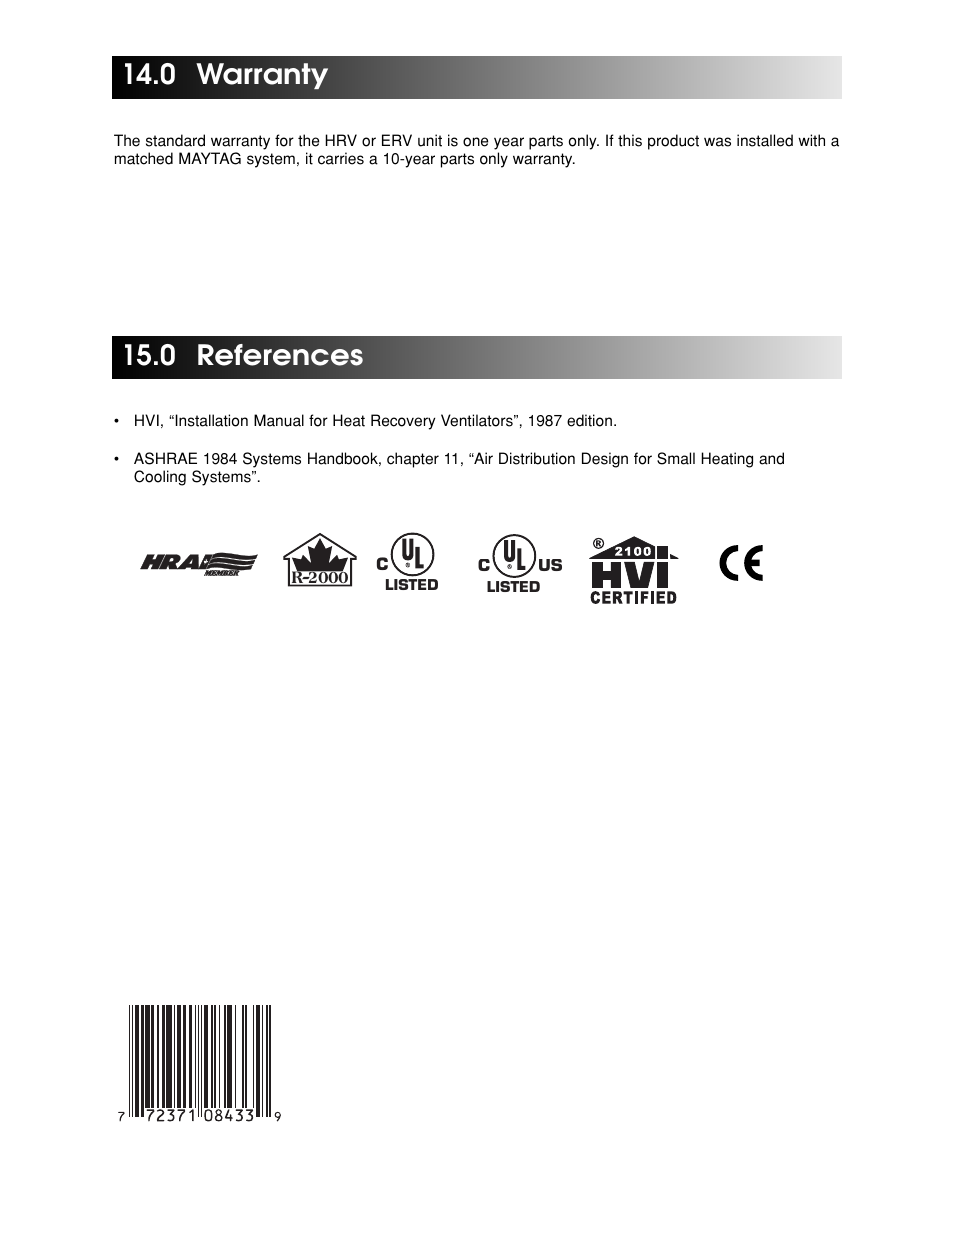 0 warranty, 0 references | Maytag Ventilation Systems HRV-210 User Manual | Page 32 / 32